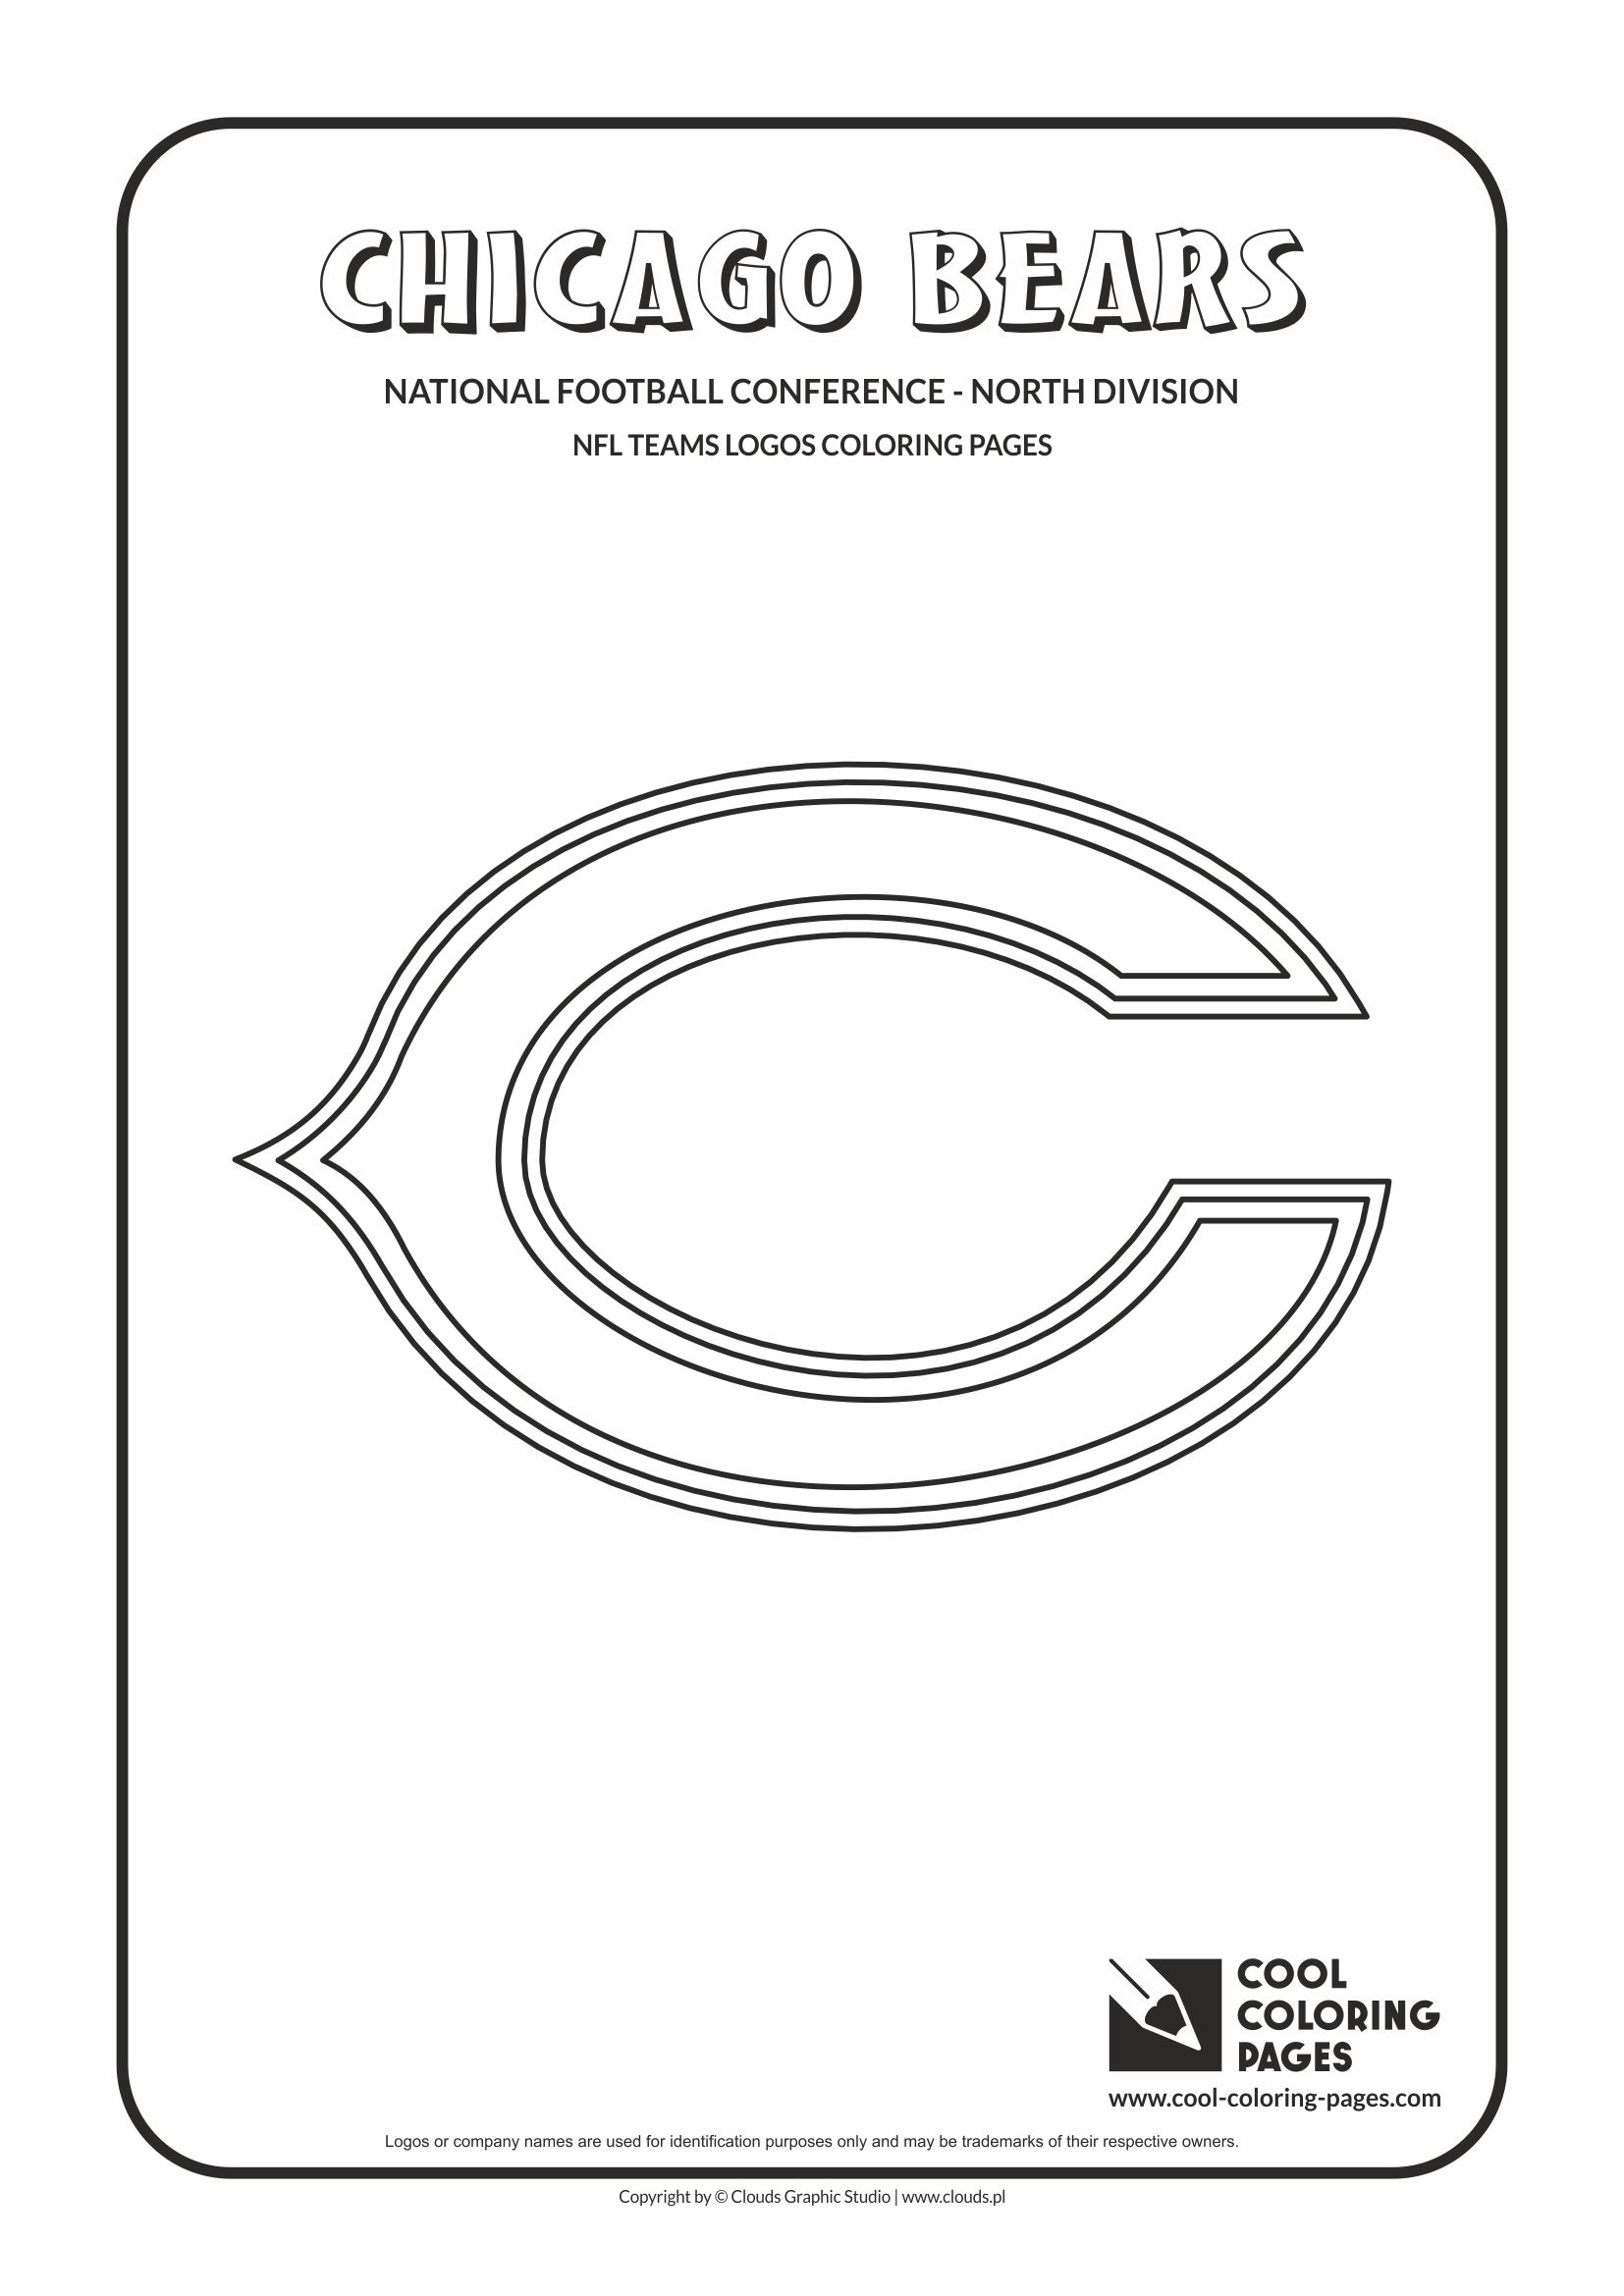 Cool Coloring Pages Chicago Bears - NFL American football teams logos